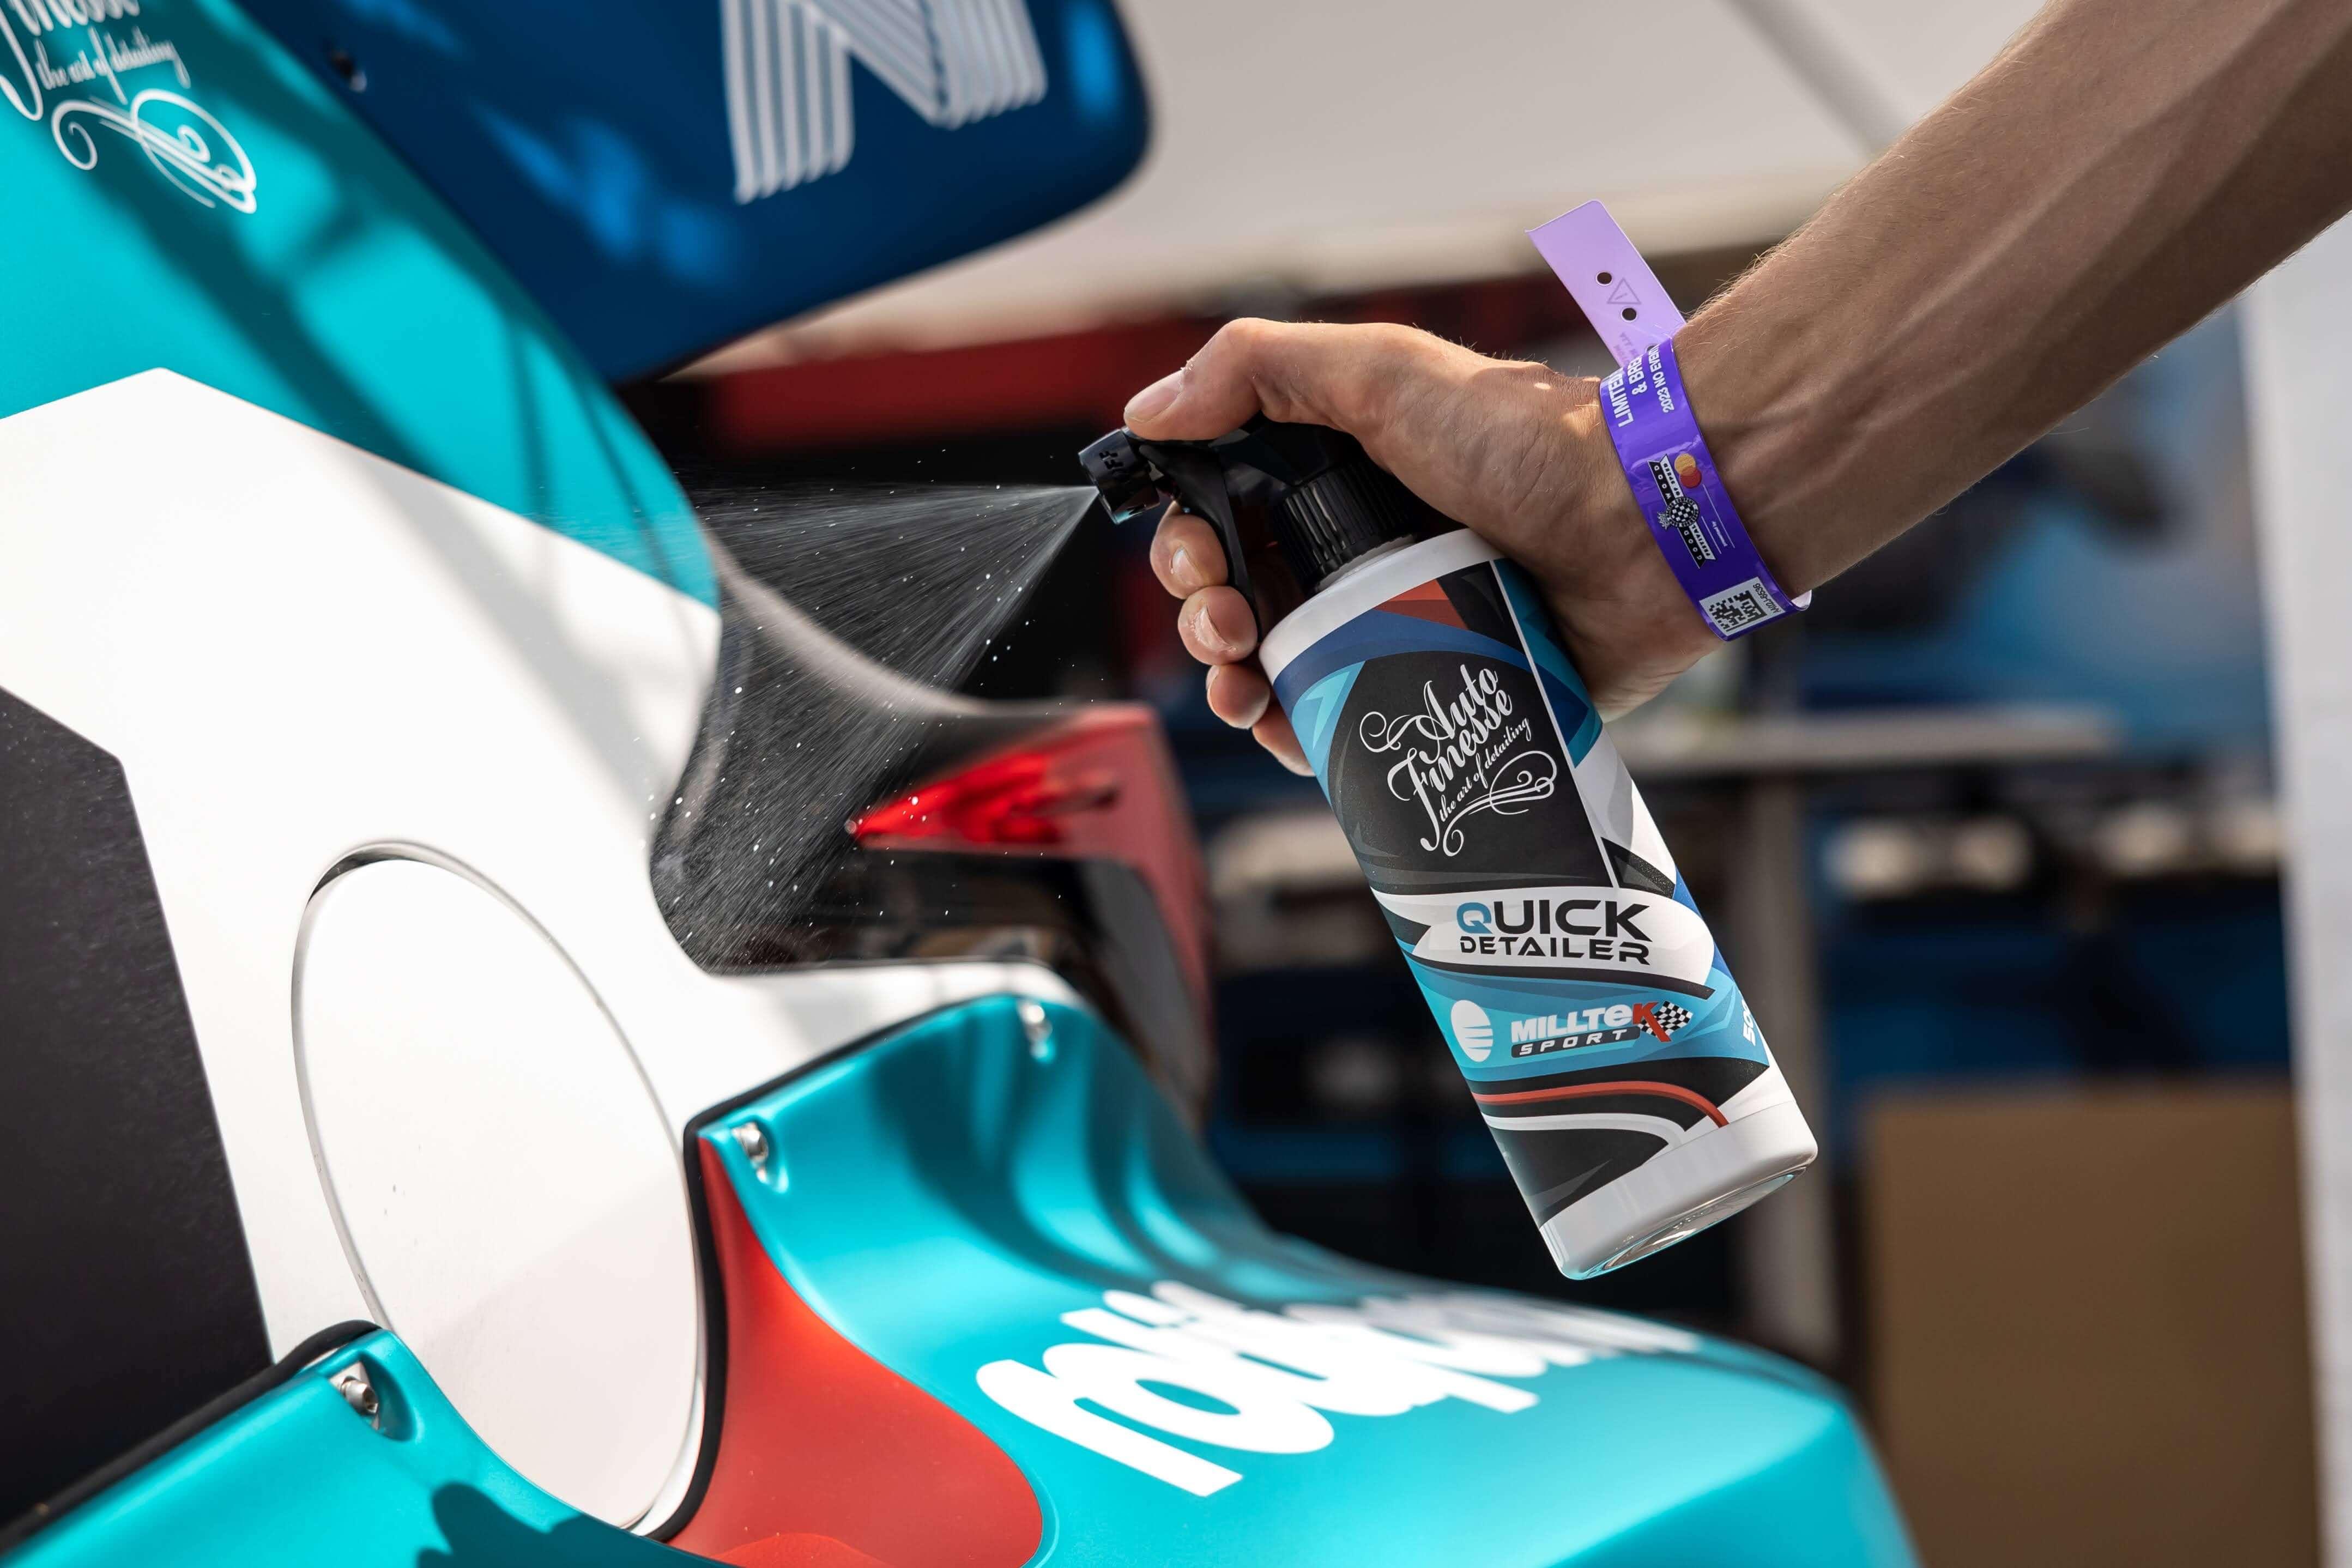 Goodwood Festival of Speed: Get Your Free Quick Detailer image